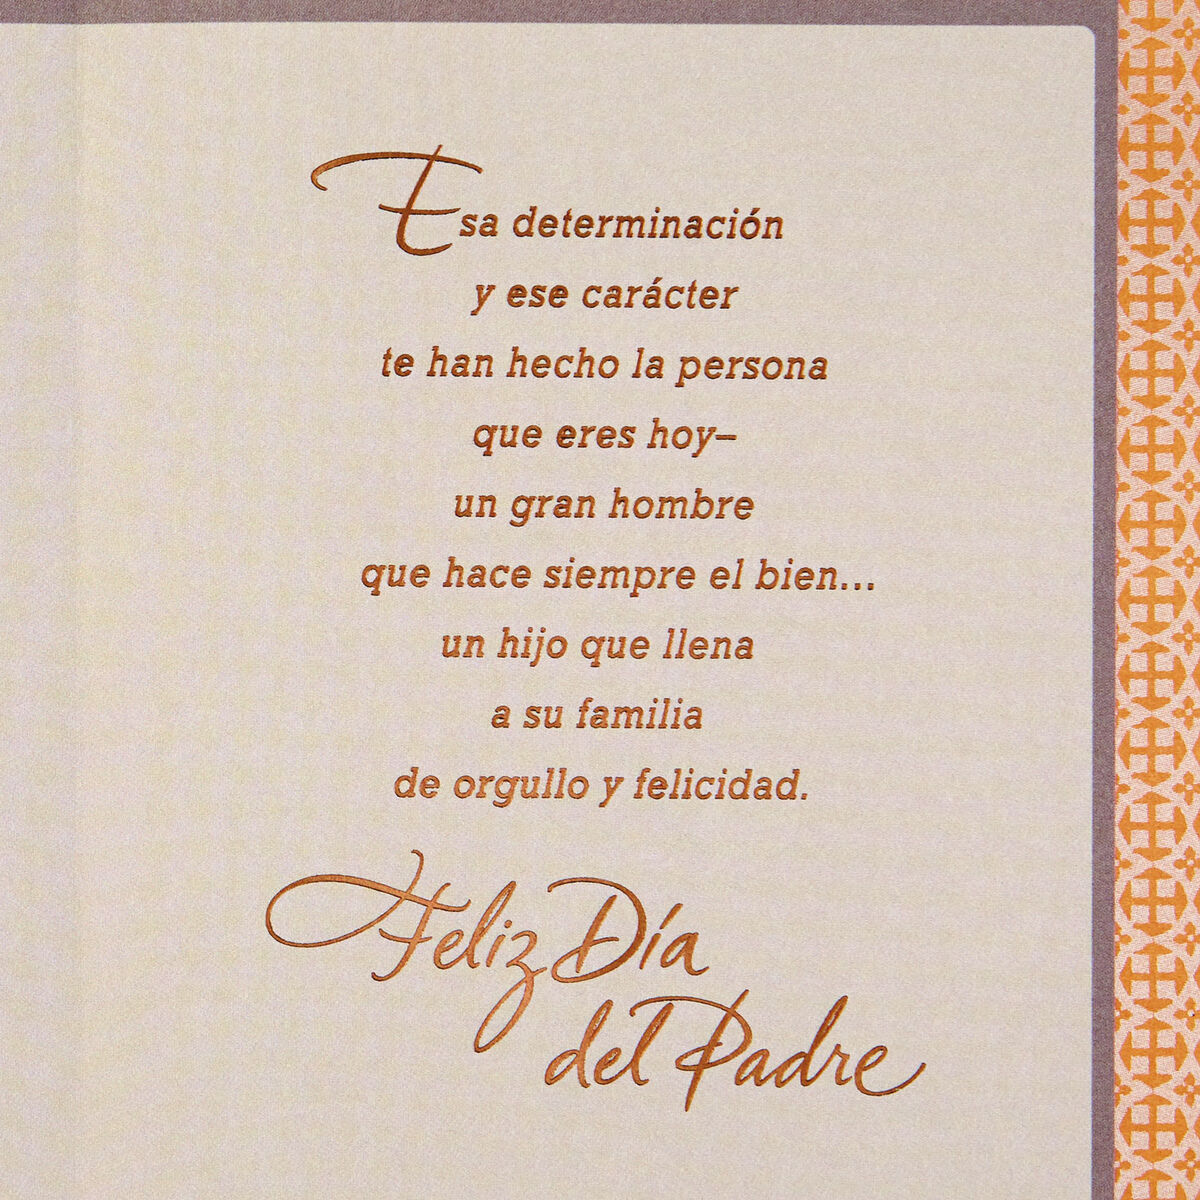 you-make-your-family-proud-spanish-language-father-s-day-card-for-son